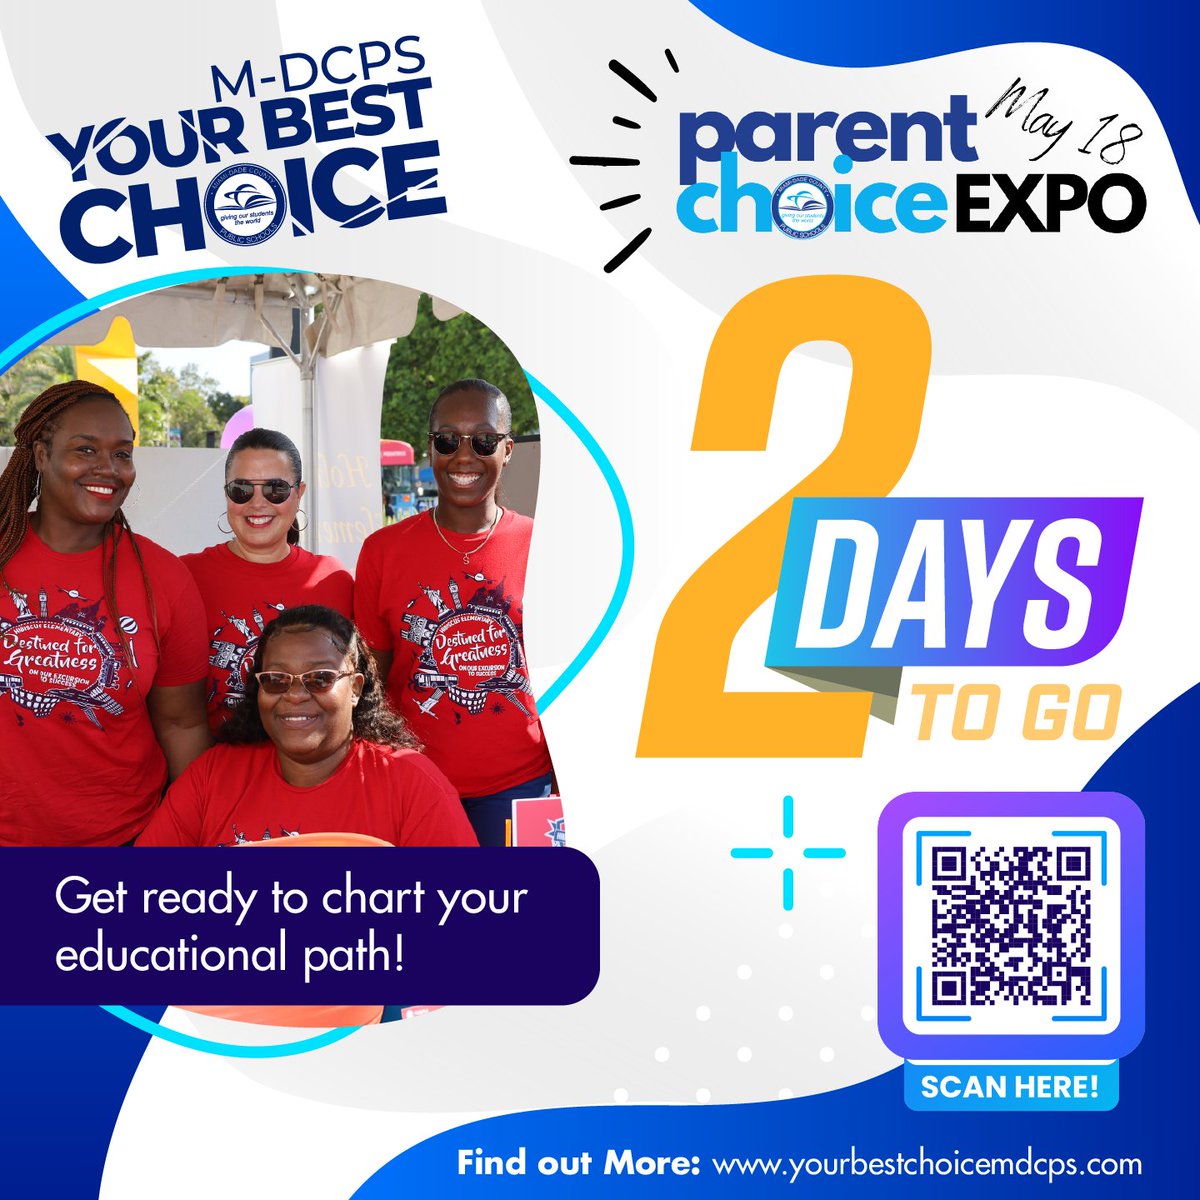 Get ready to chart your child’s educational path! The Parent Choice Expo is just two days away. Join us this Saturday at @MDCollege Kendall Campus to find the perfect fit for your future. Visit yourbestchoicemdcps.com for more information. #YourBestChoiceMDCPS